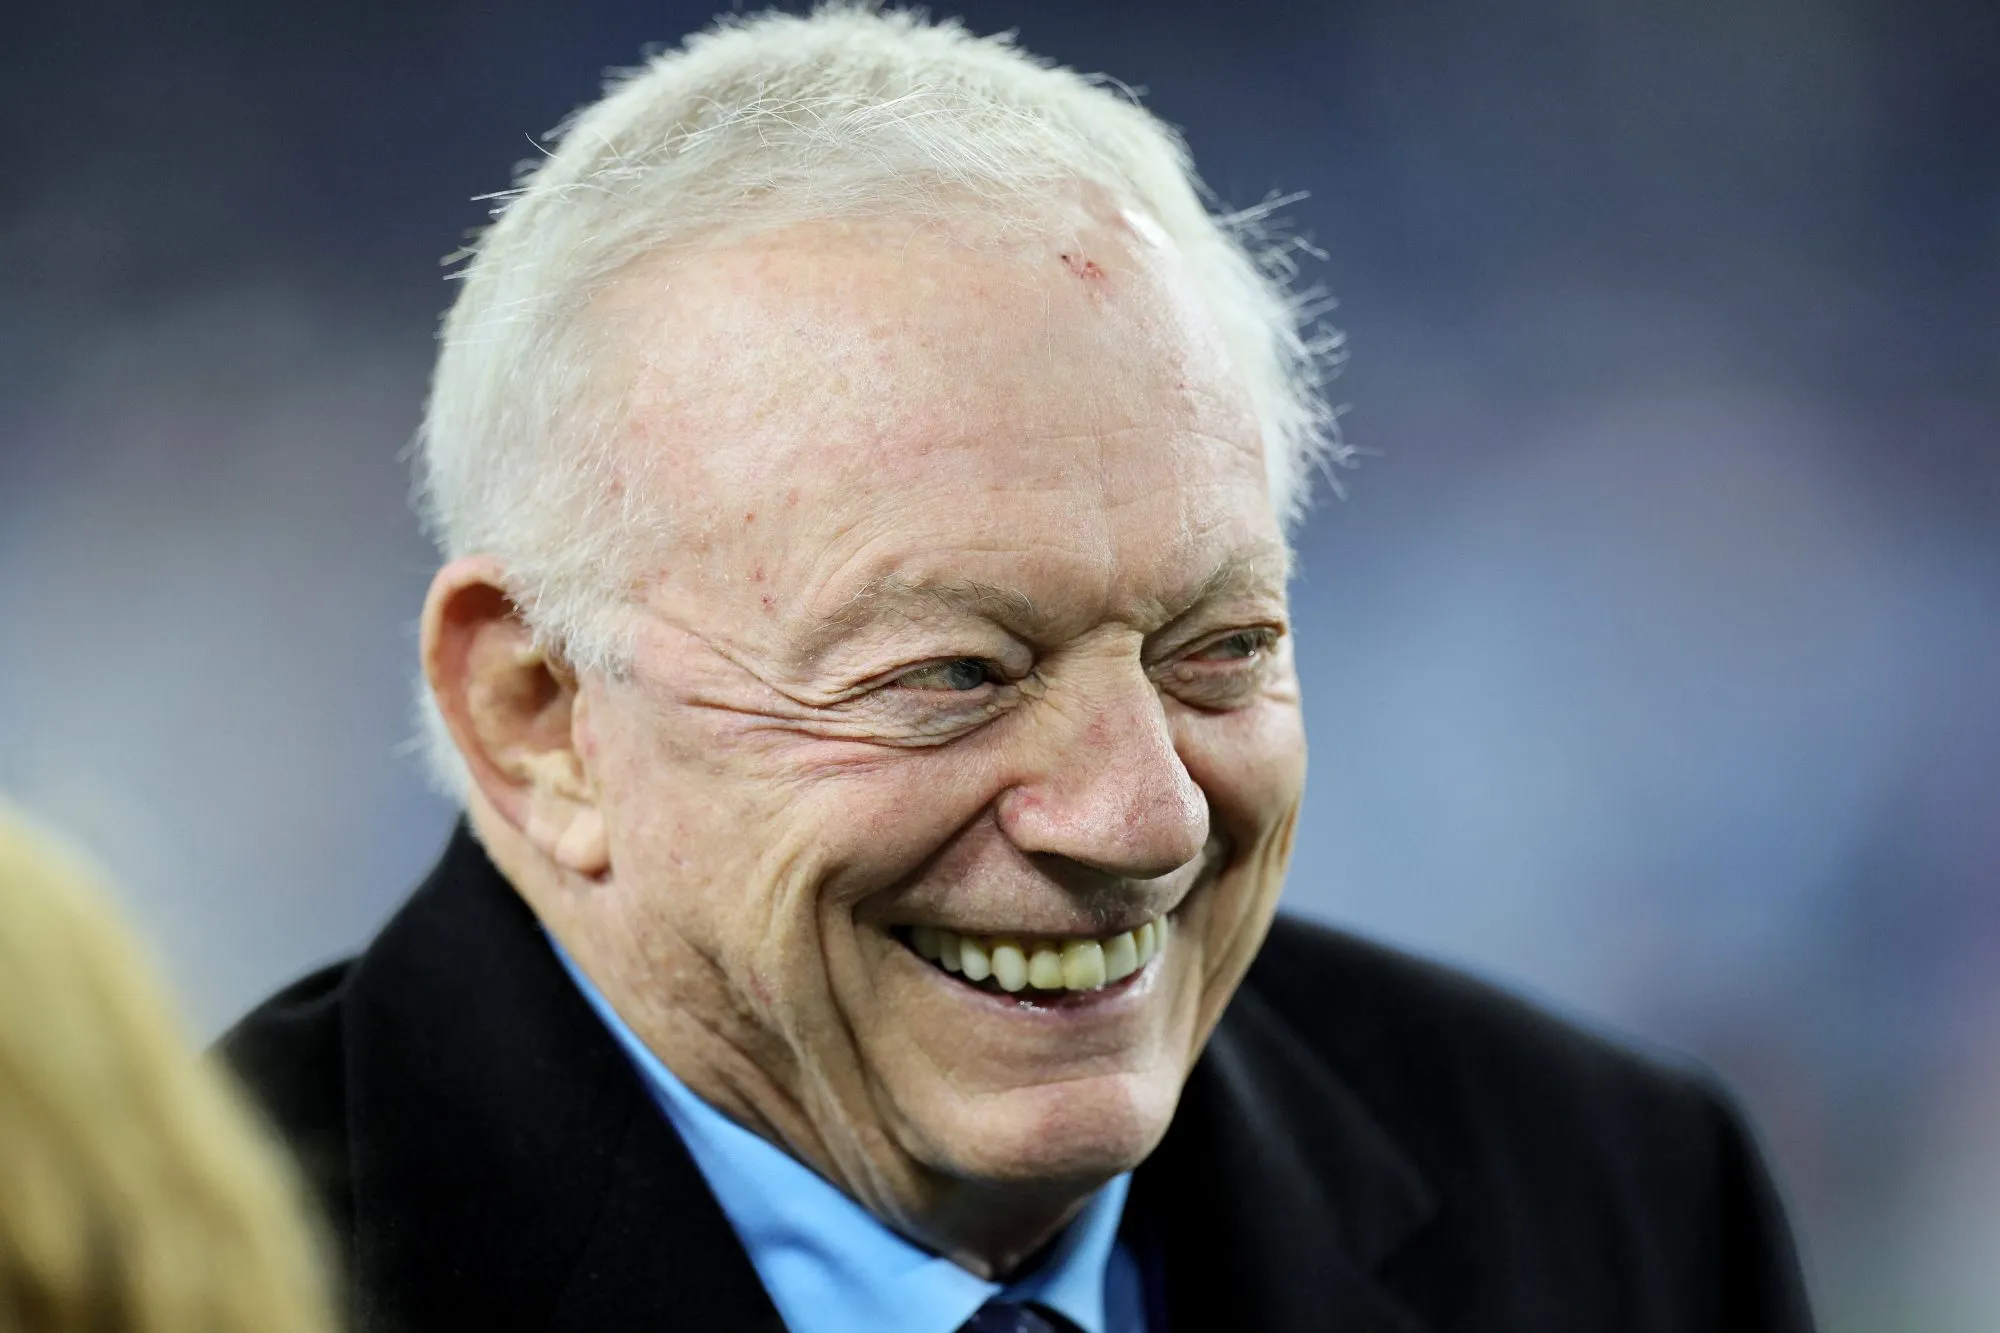 Video : The Terrifying Jerry Jones AI Hologram That the Cowboys Unveiled at AT&T Stadium Has NFL Fans in Fits of Hysteria